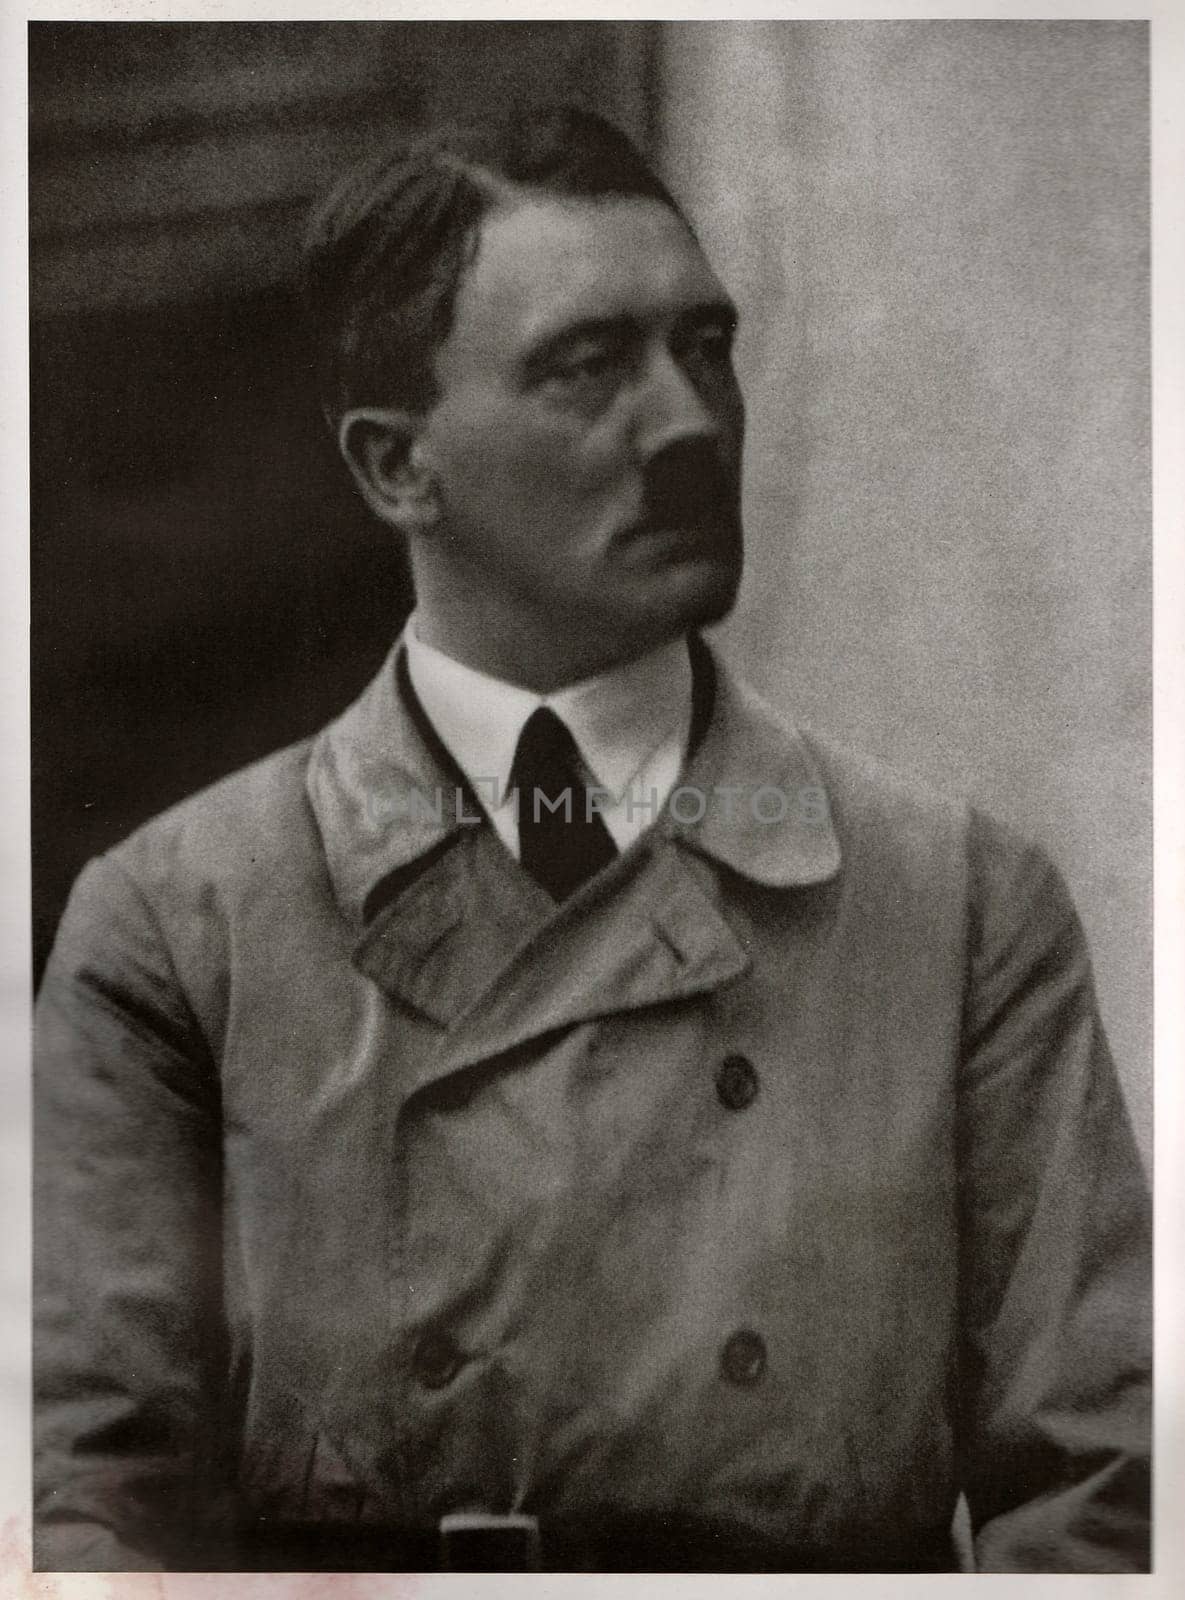 Portrait of Adolf Hitler, leader of nazi Germany. Reproduction of antique photo. by roman_nerud